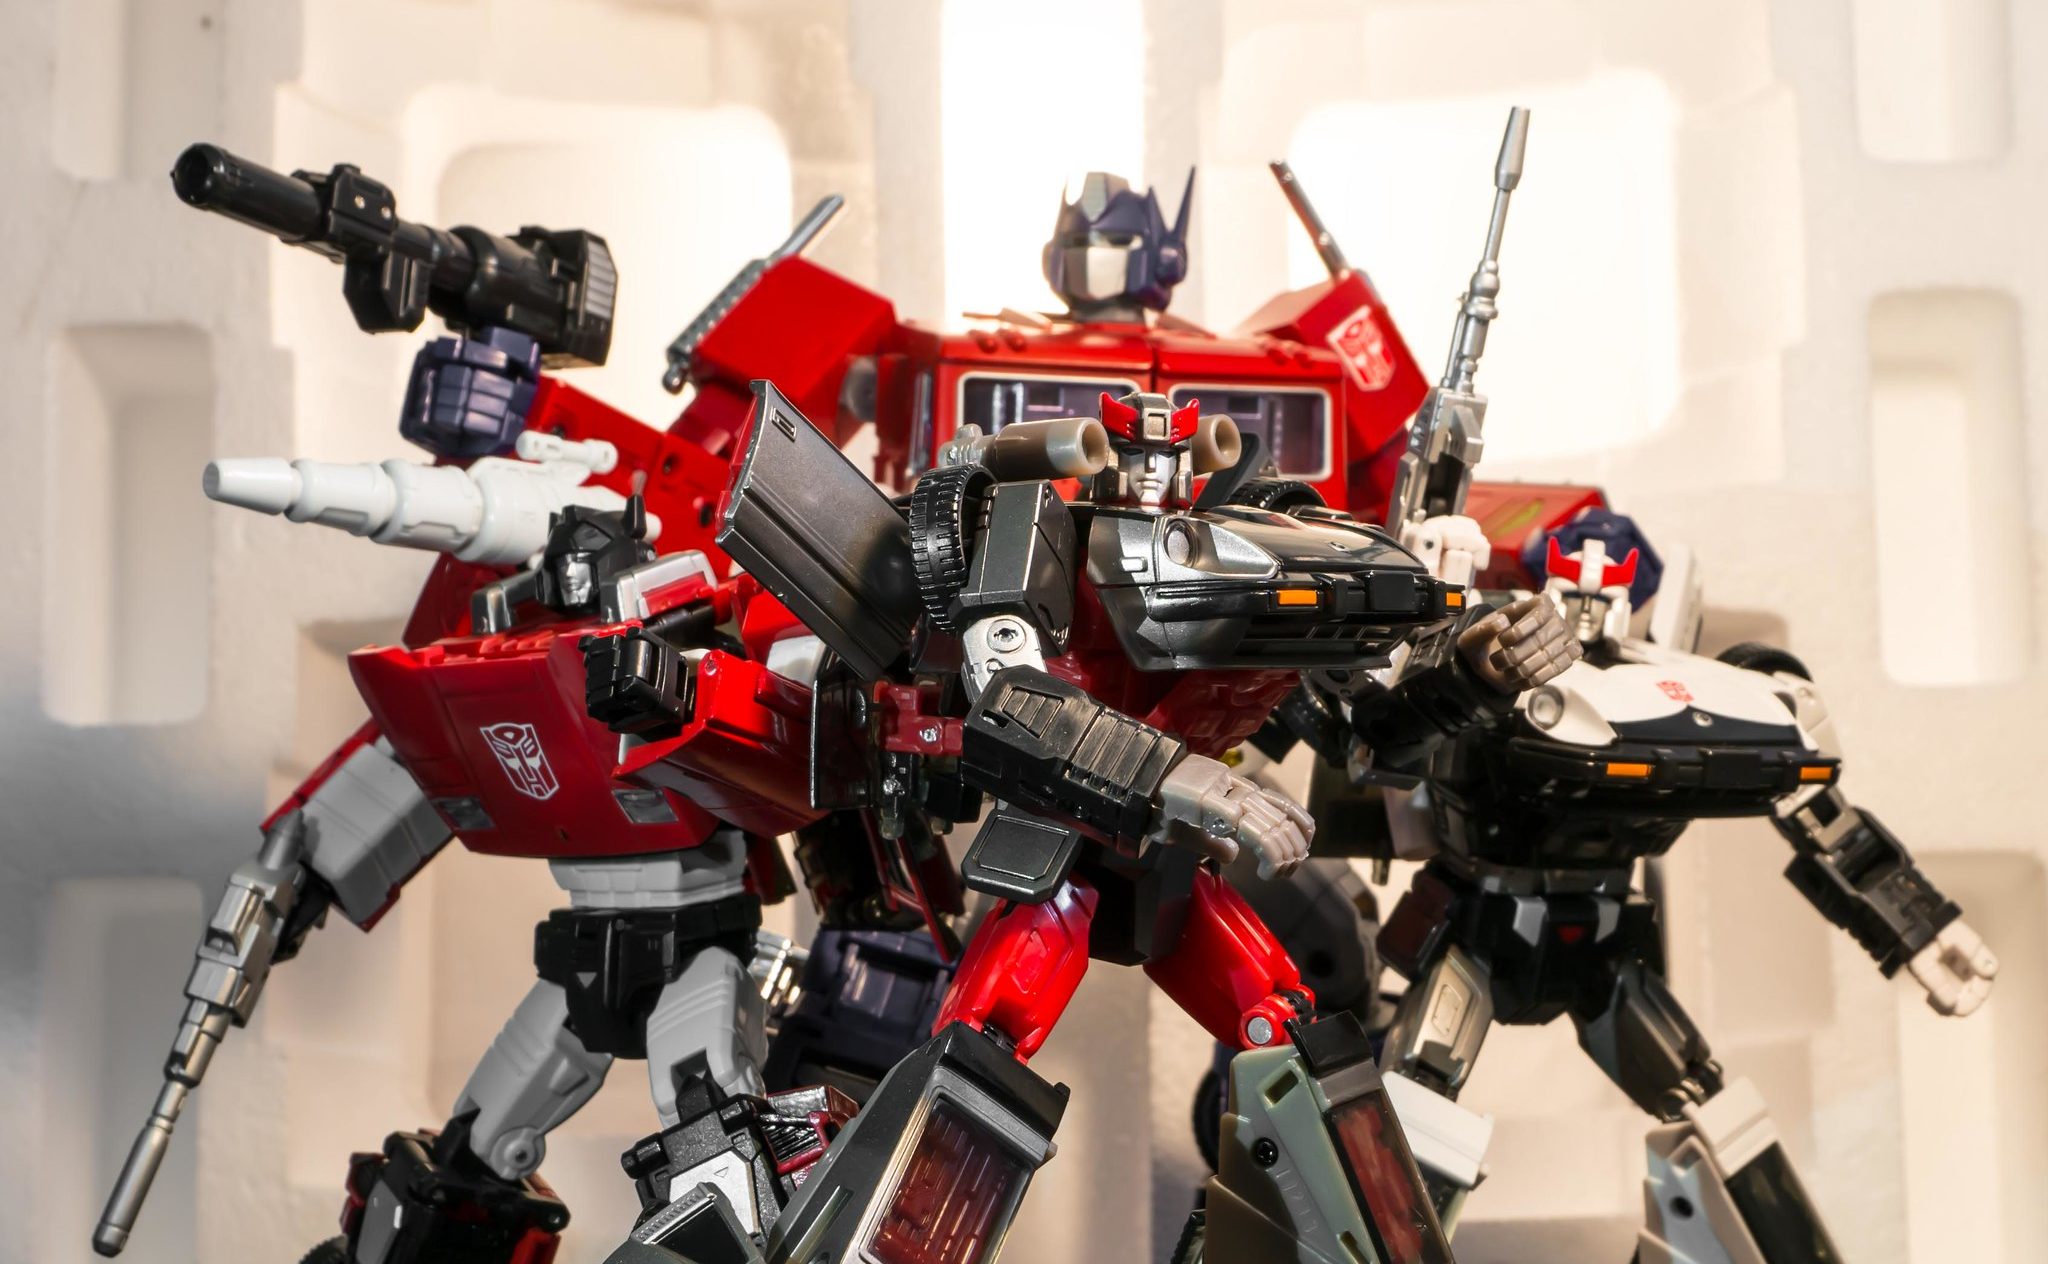 Four Autobots molded in red, white, and\black